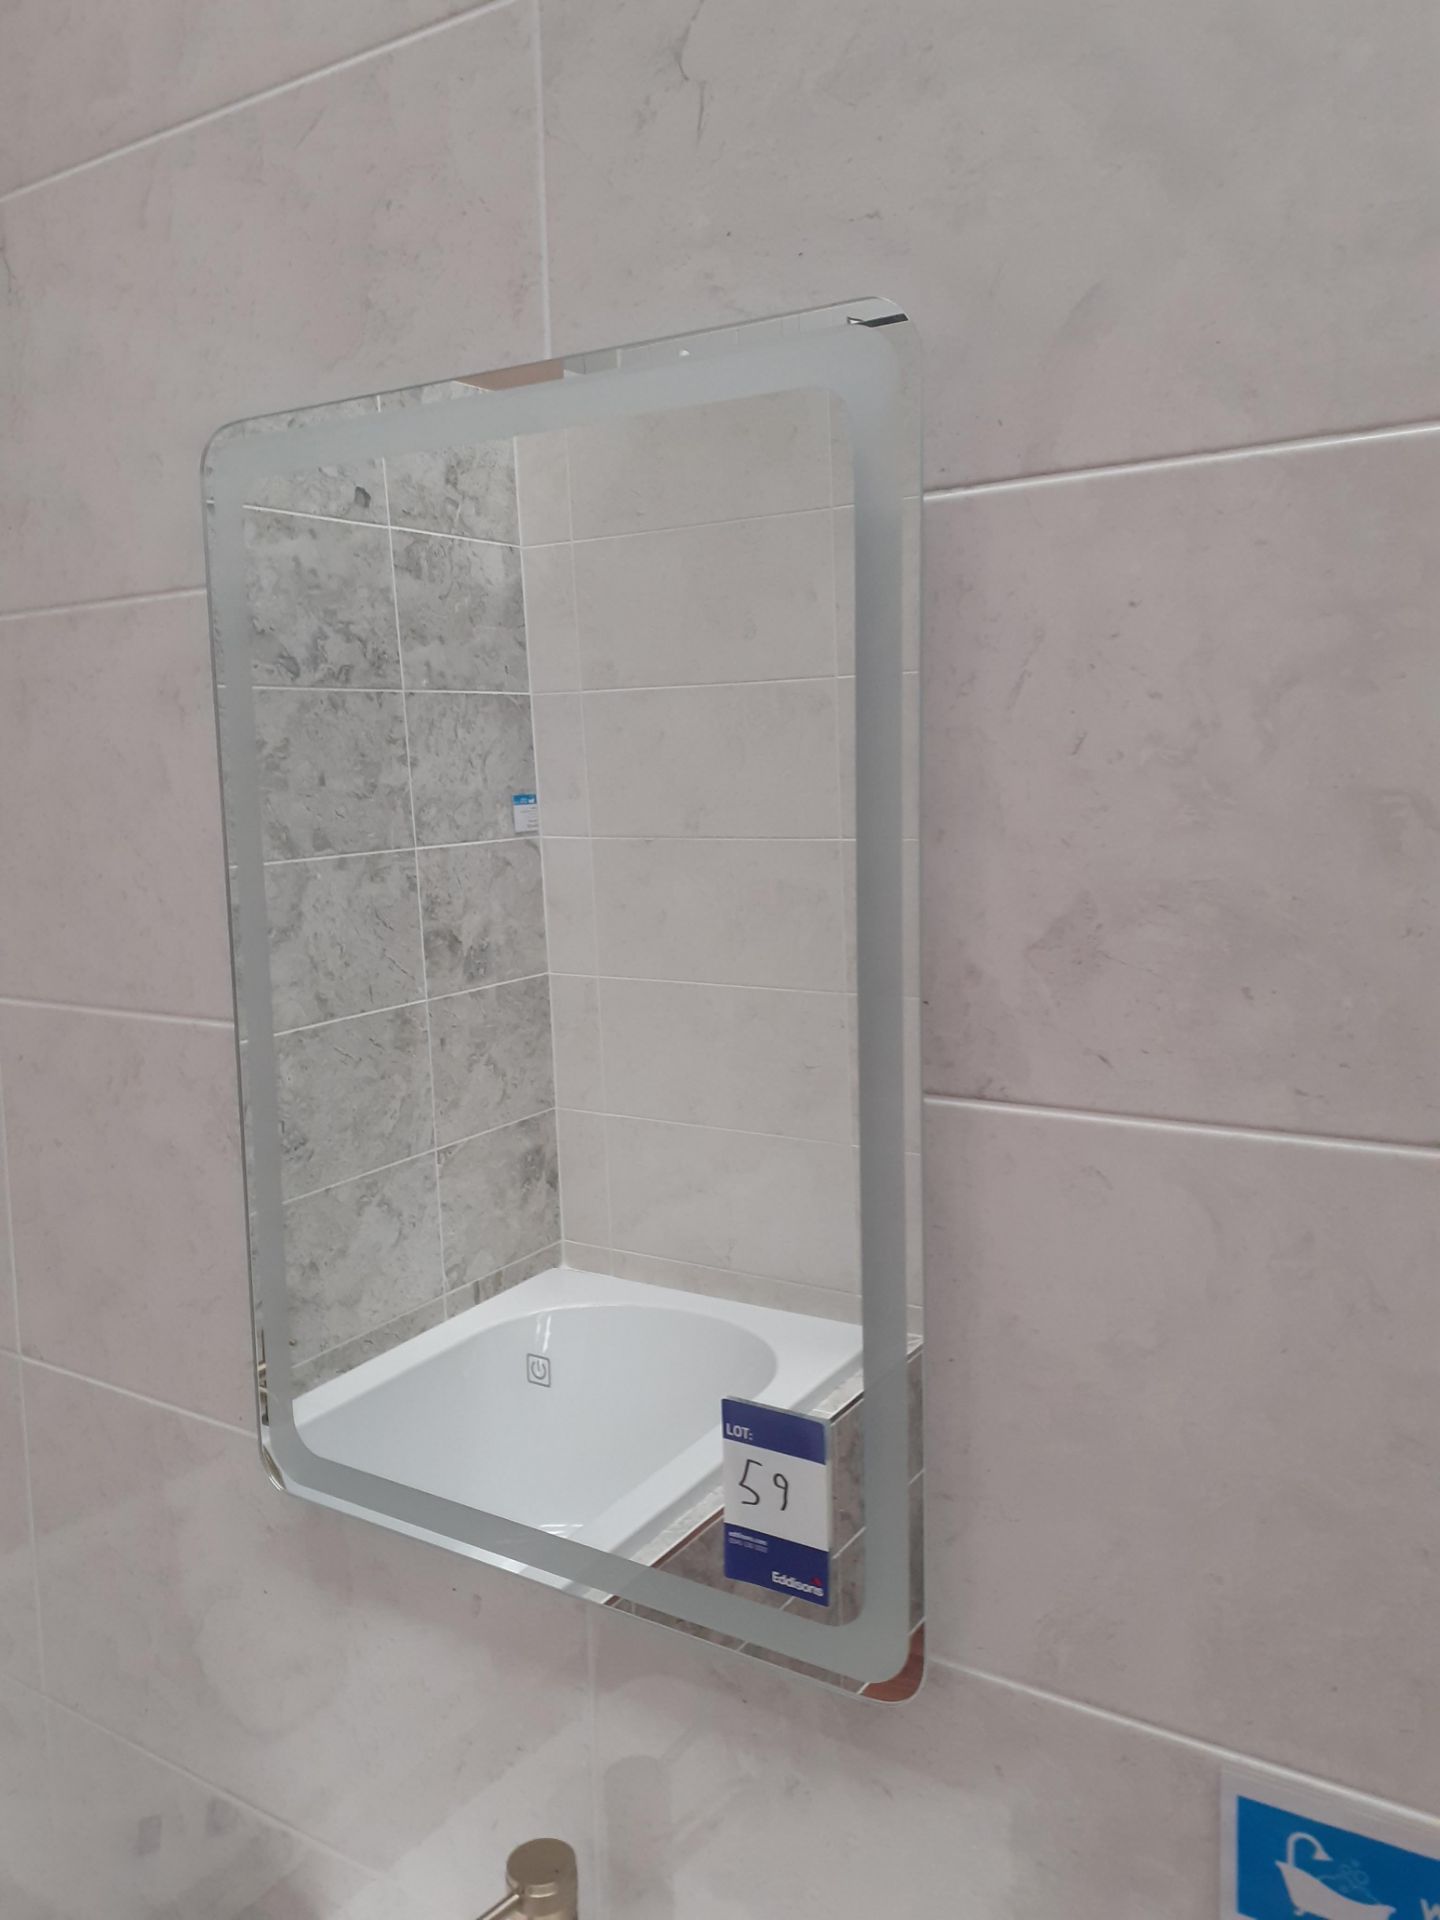 Illuminated Mirror 750 x 500mm - To be disconnected by a qualified tradesperson/electrician.